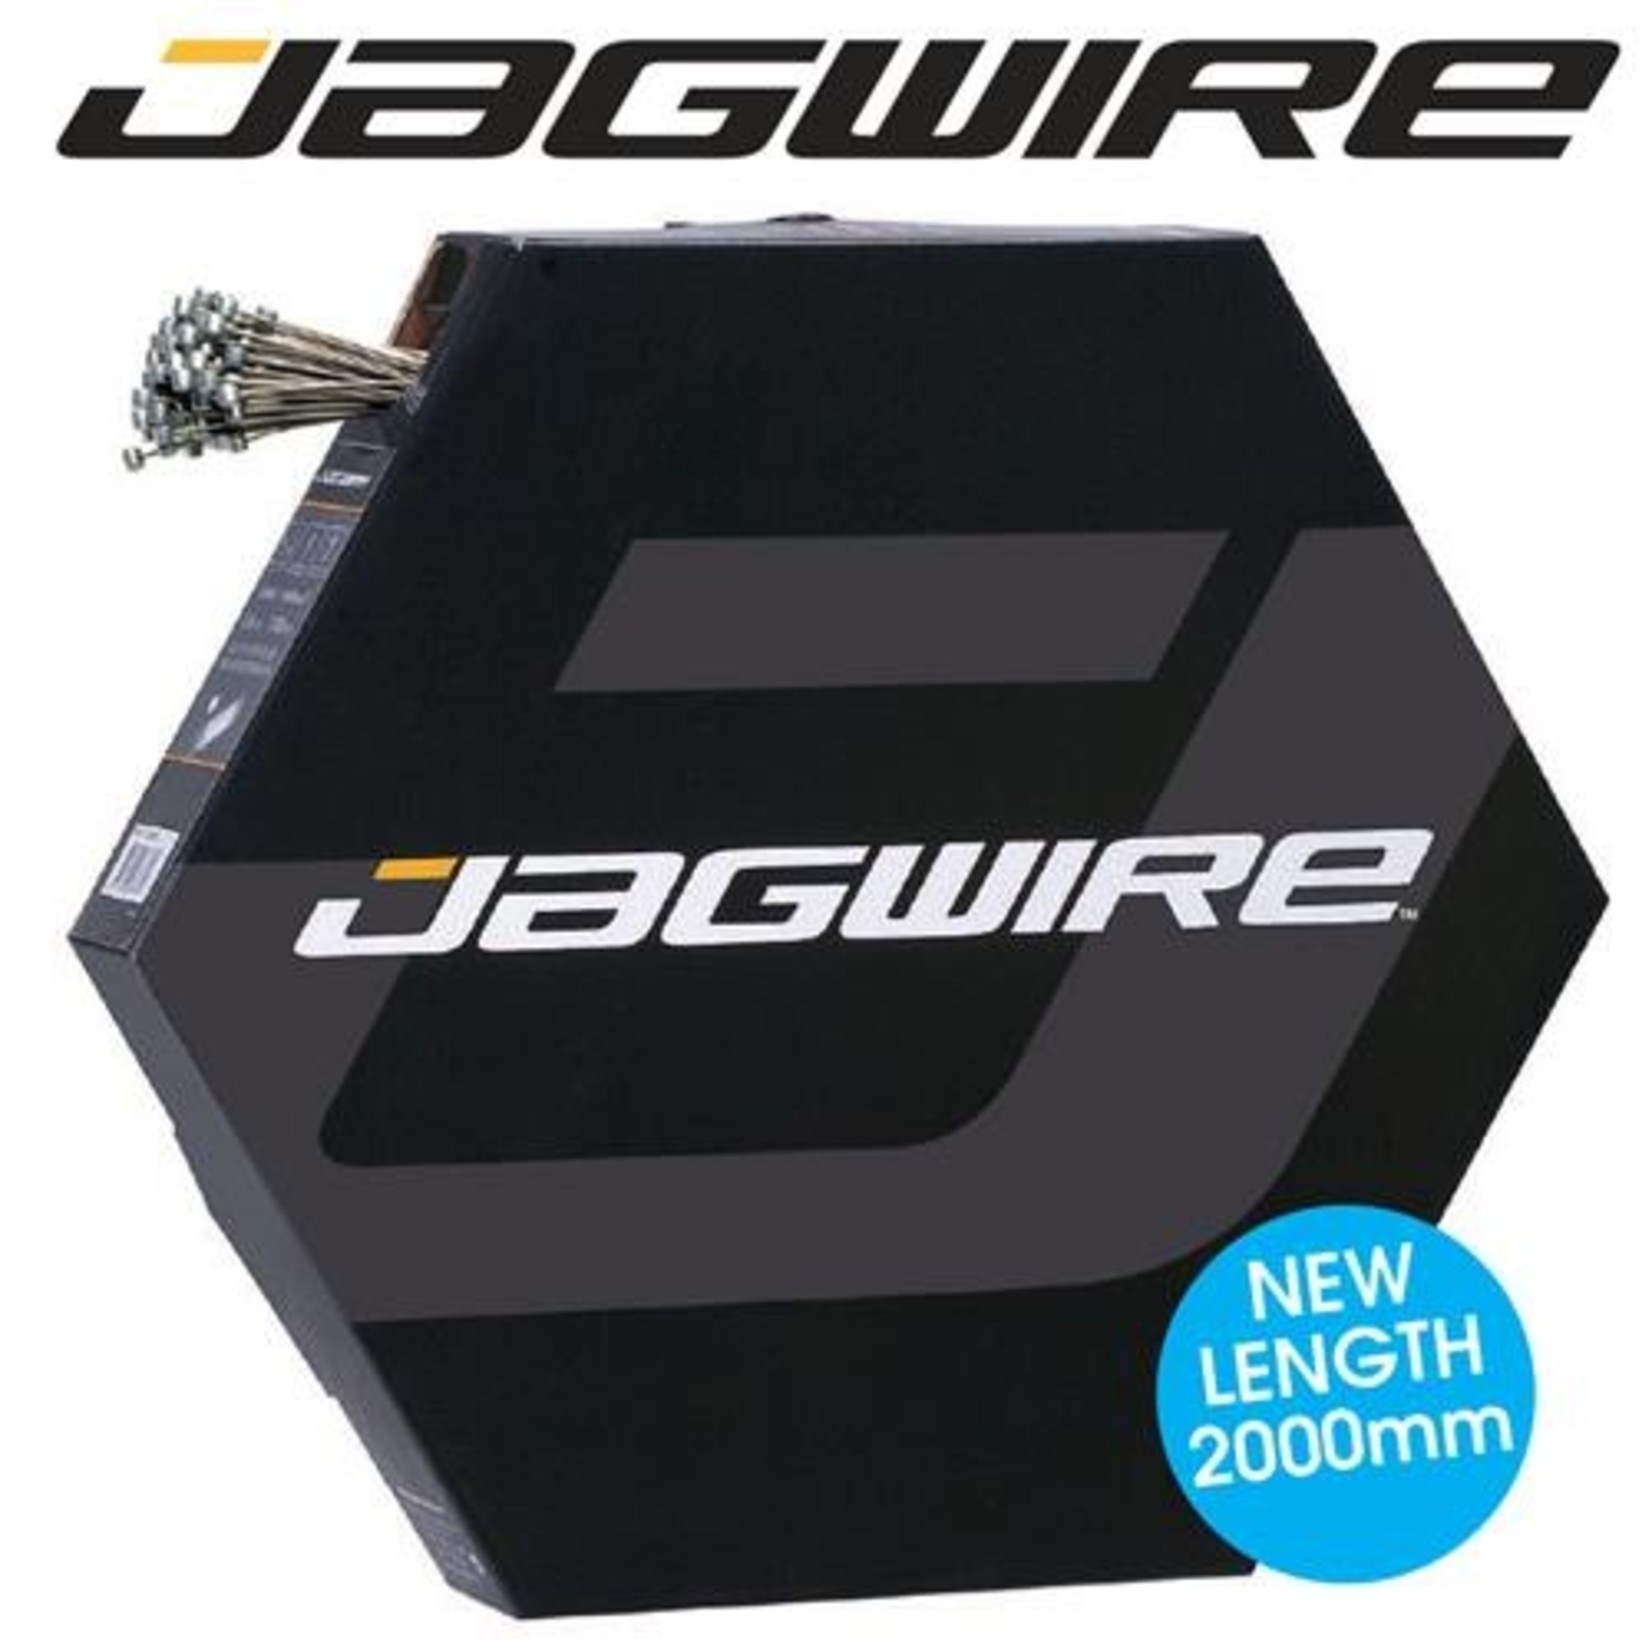 Jagwire Jagwire Bicycle Stainless Steel Slick MTB Brake Inner Cable 100 Per Box